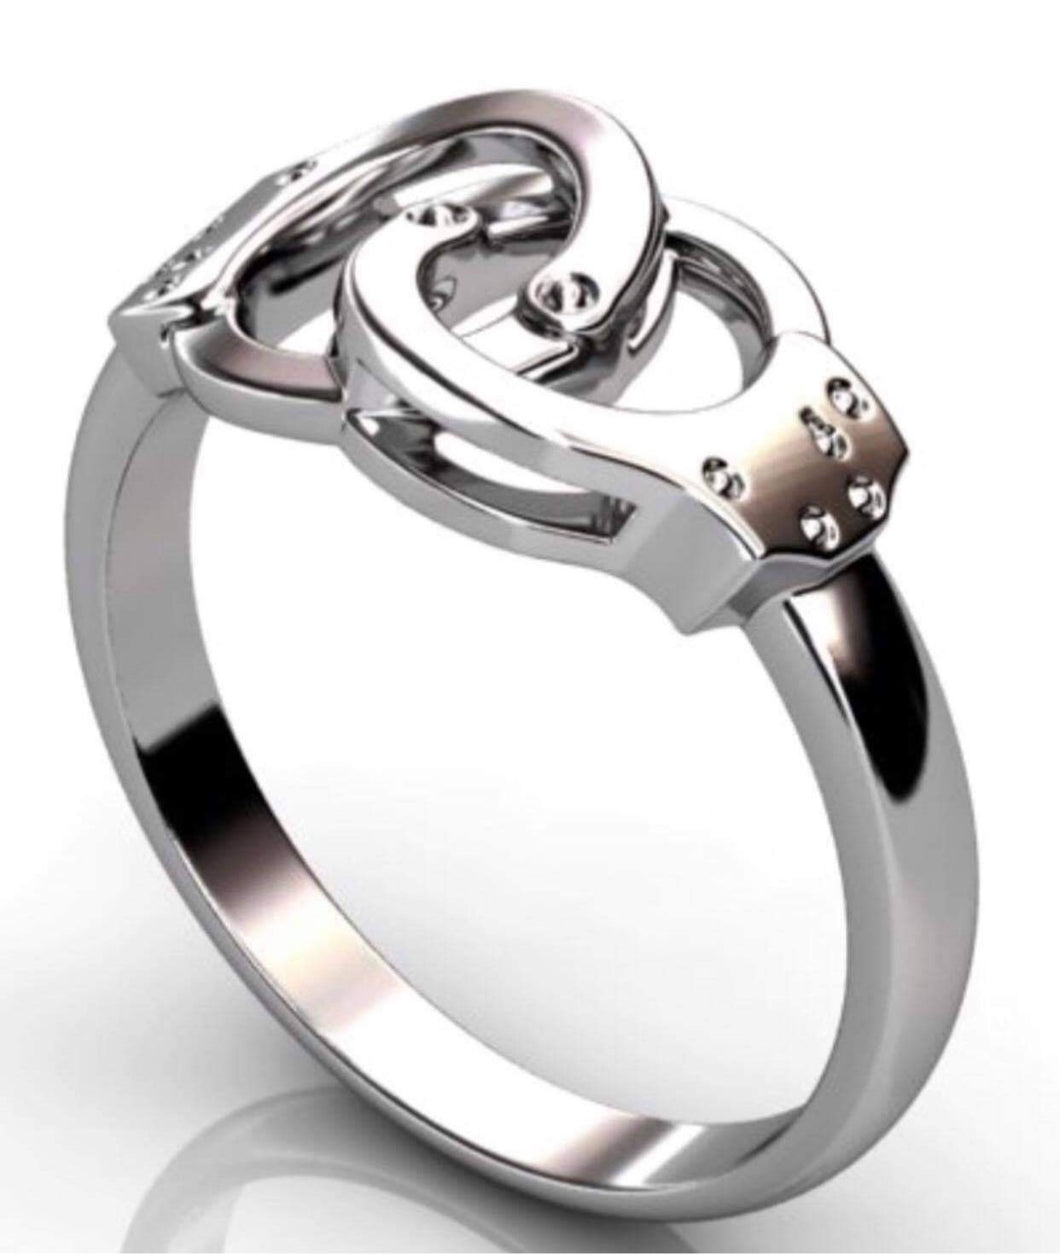 **You must go to canam-thinblueline.ecwid.com to purchase Sterling Silver Handcuff Ring